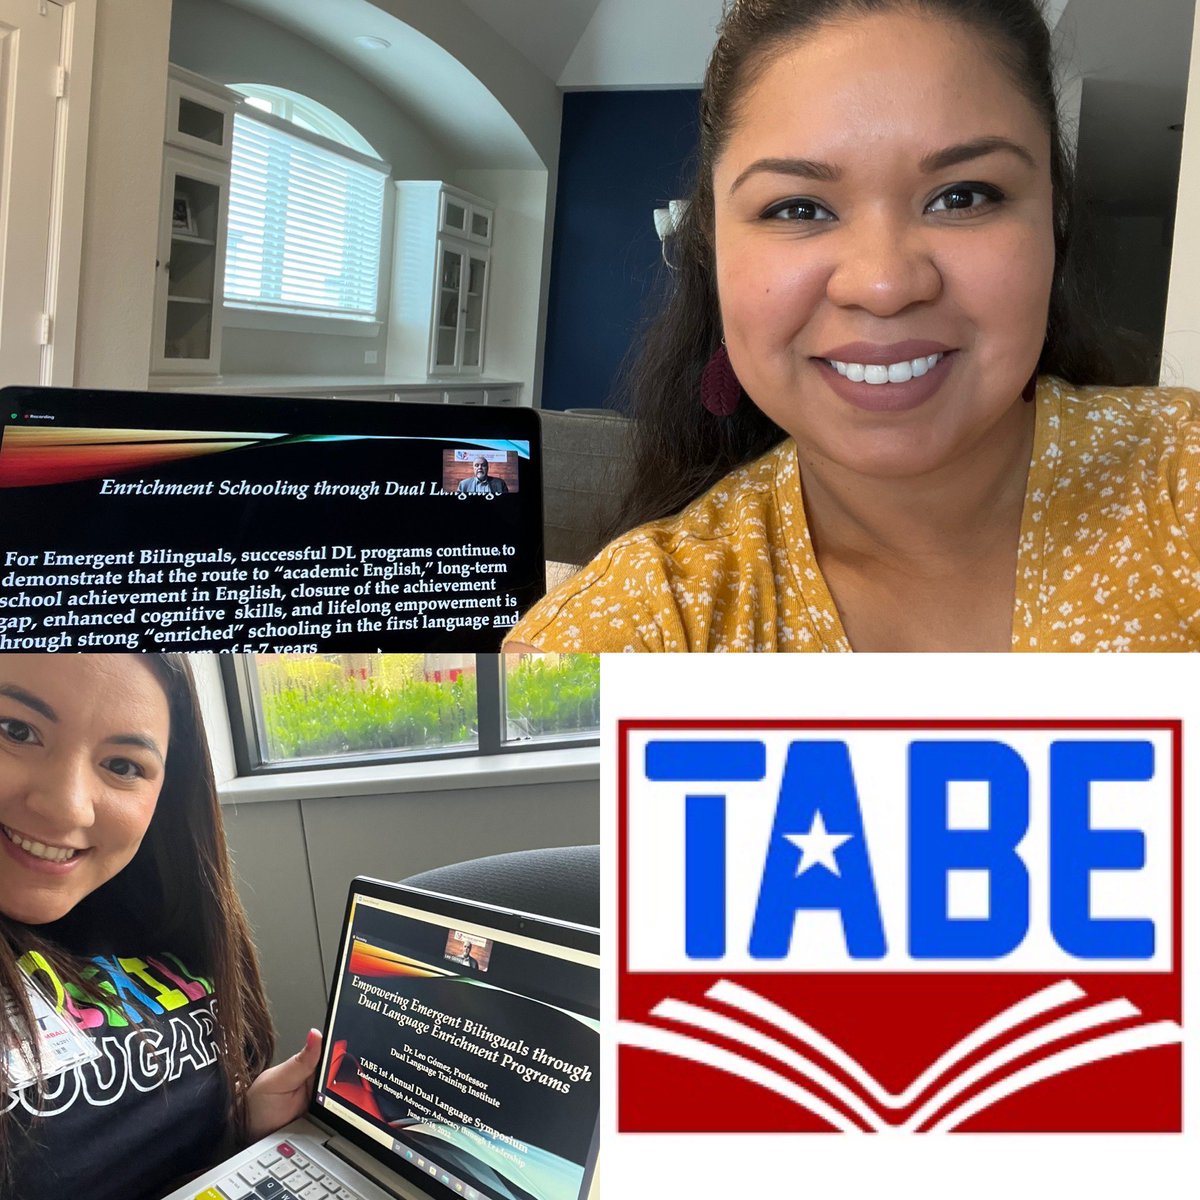 We work together and learn together to improve our craft and advocate for Emergent Bilingual students! Thank you @TA4BE and @TISDMulti for the opportunity. #dynamicduo #summerPD #TABE2022 #enrichment #DualLanguage